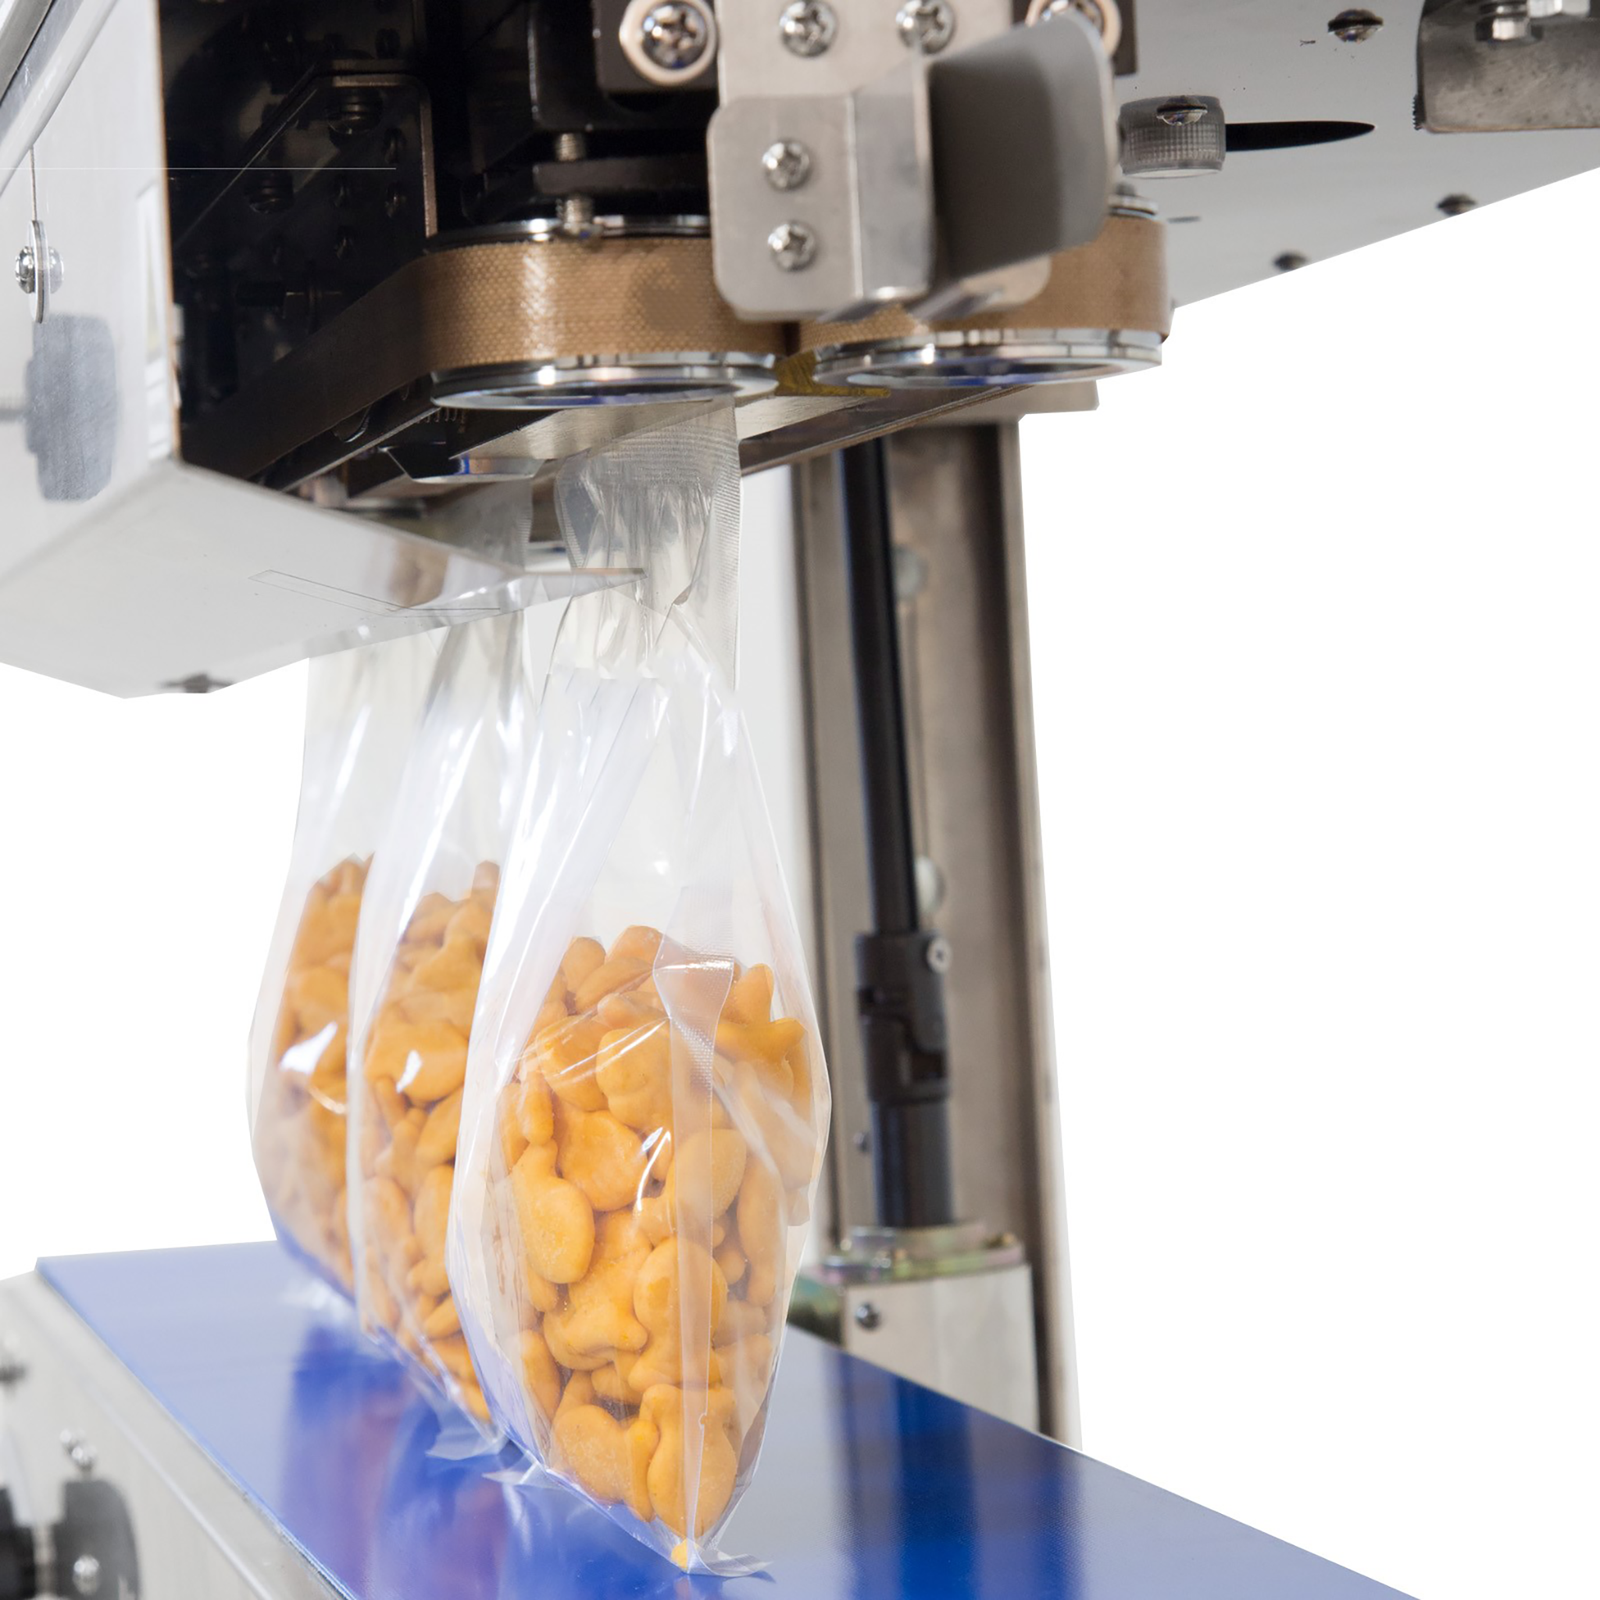 plastic bag sealed filled with orange crackers by A JORES TECHNOLOGIES® continuous band sealers for 200v. And close up of the heating element.